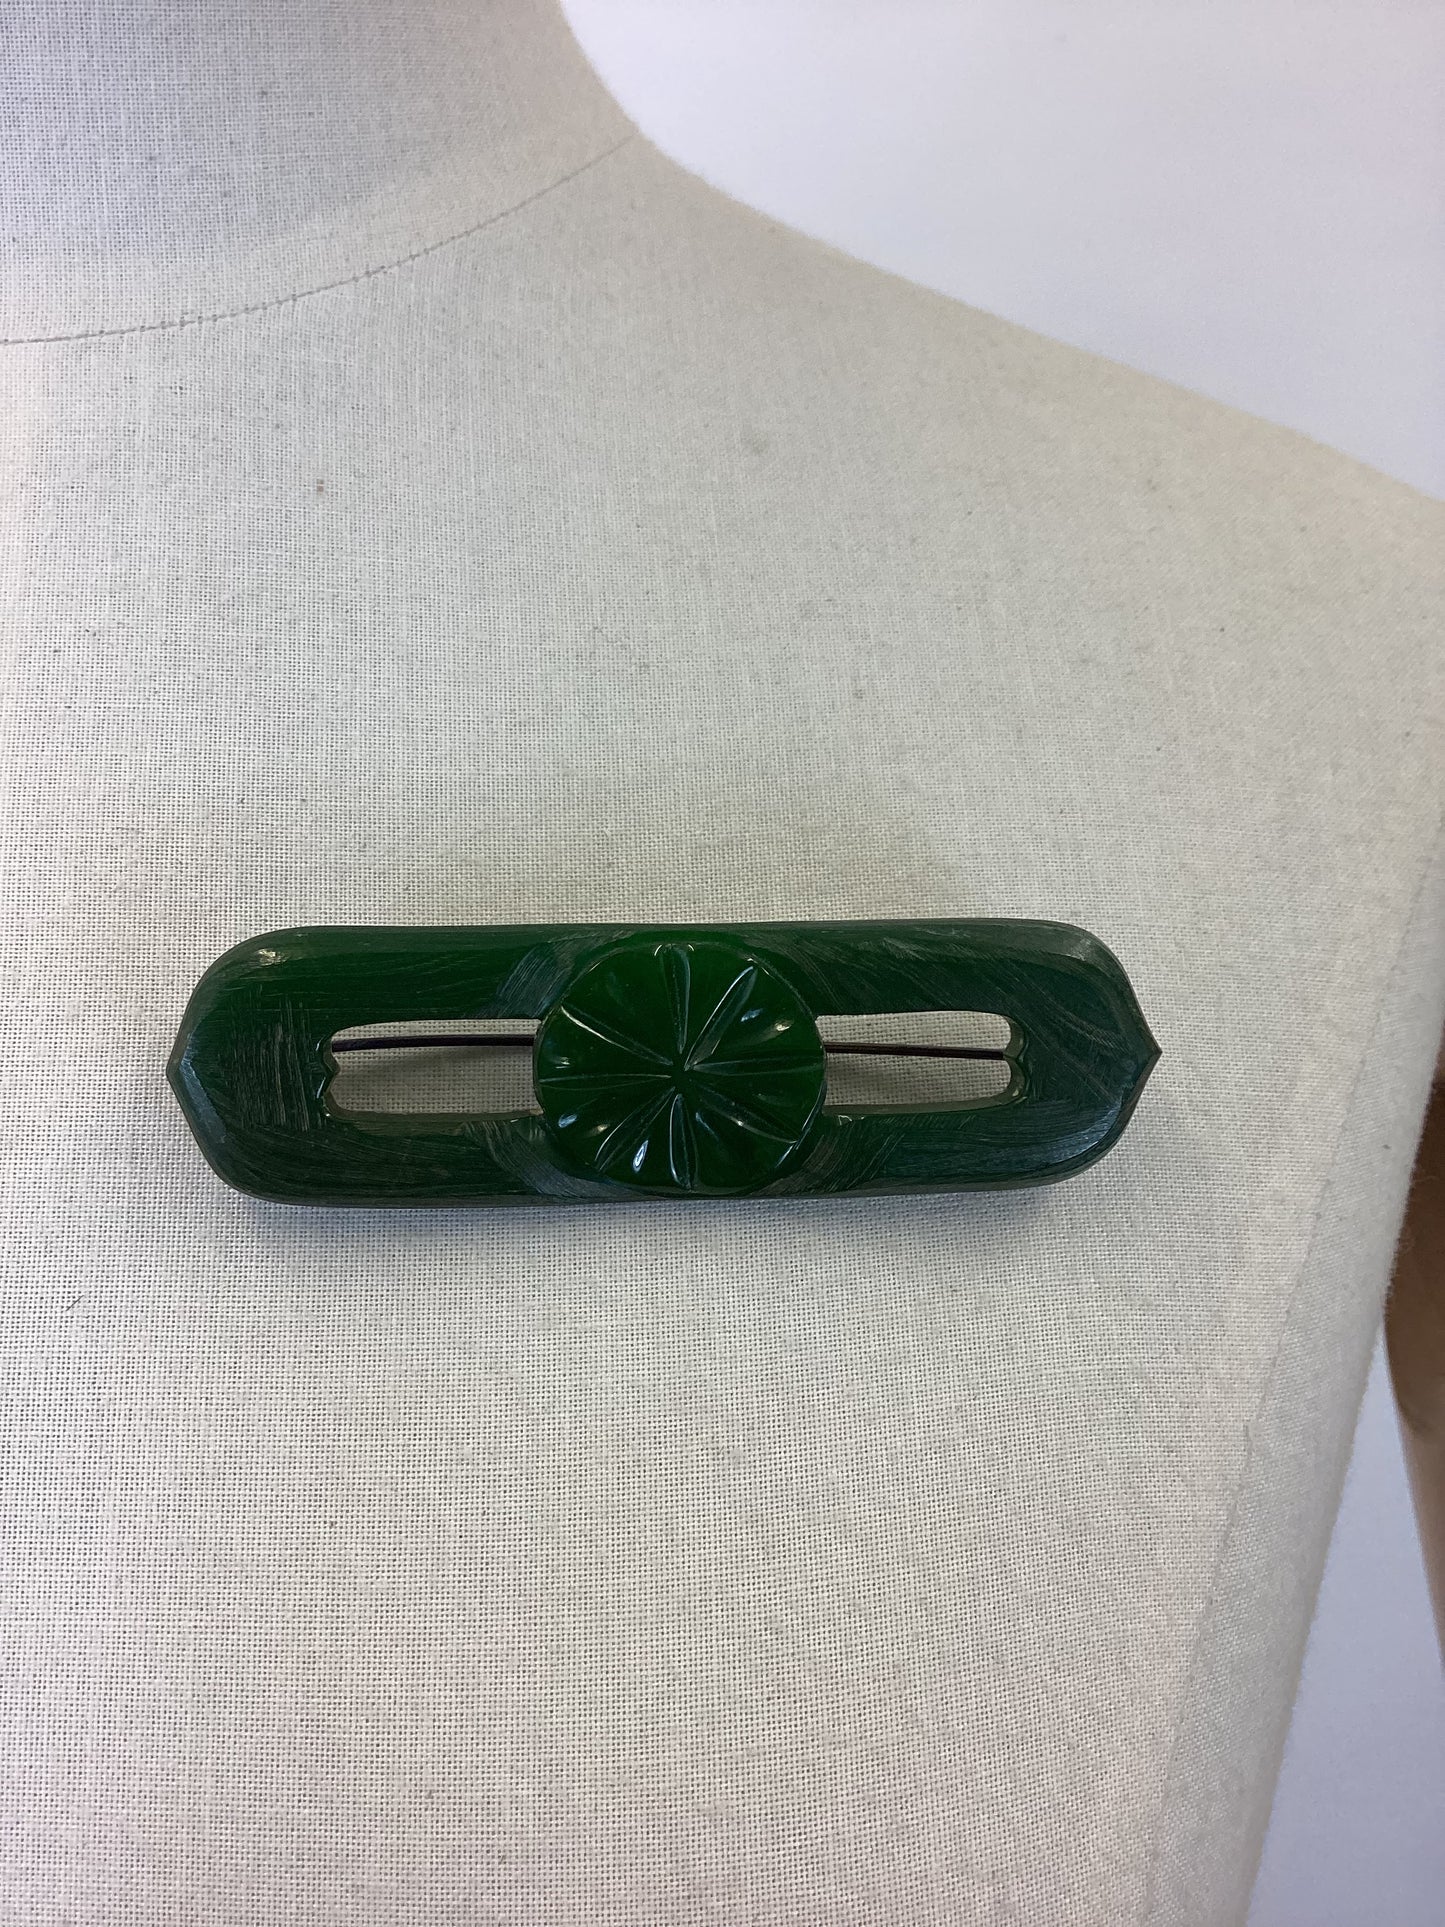 Original Late 1930’s Early 1940’s Carved Bakelite Brooch - In Forest Green